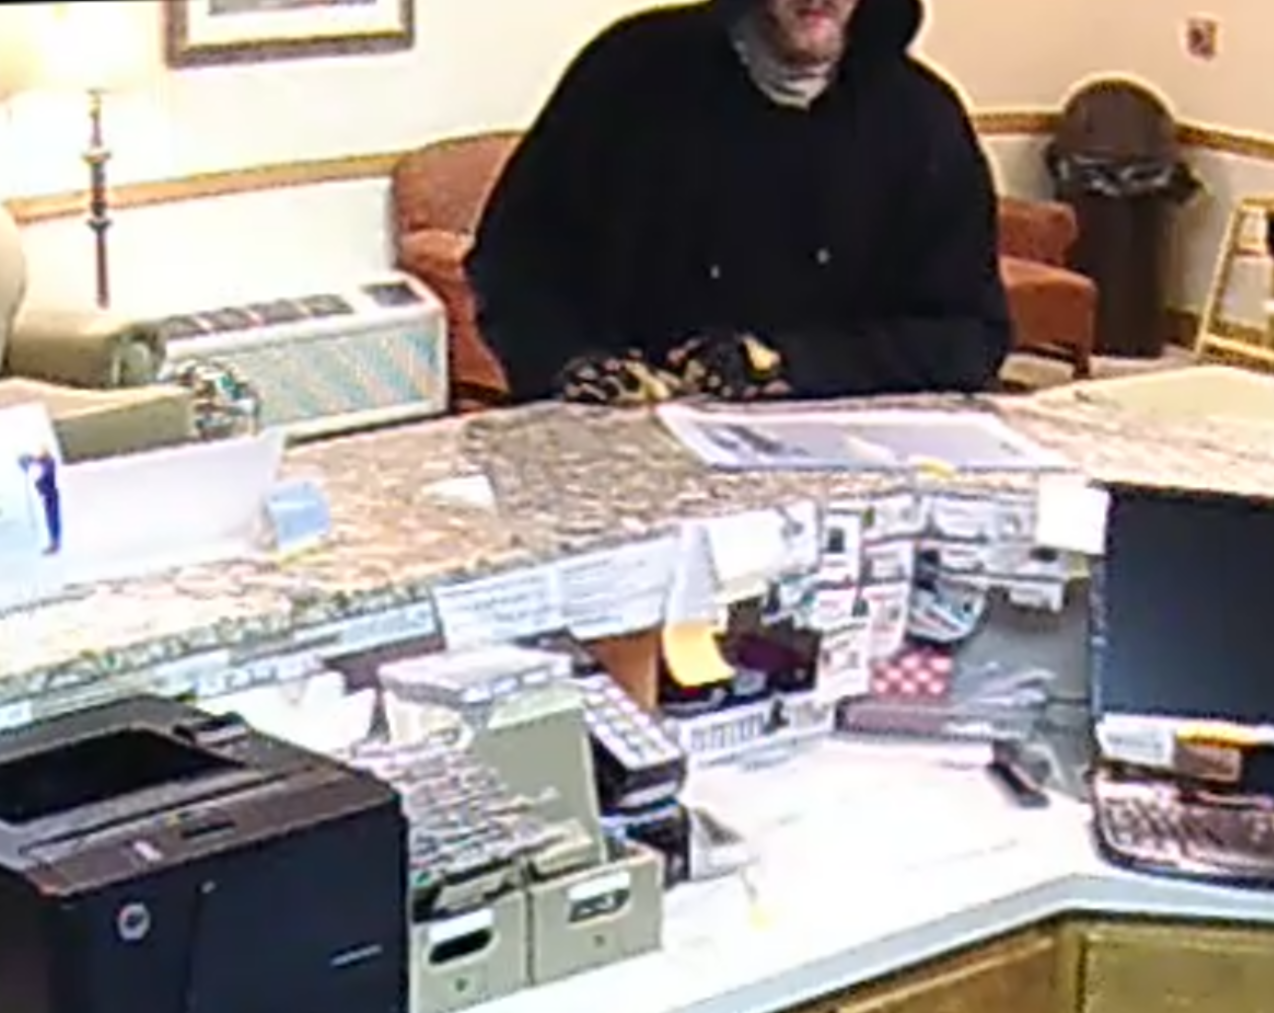 Image 1 of alleged suspect in robbery investigation.